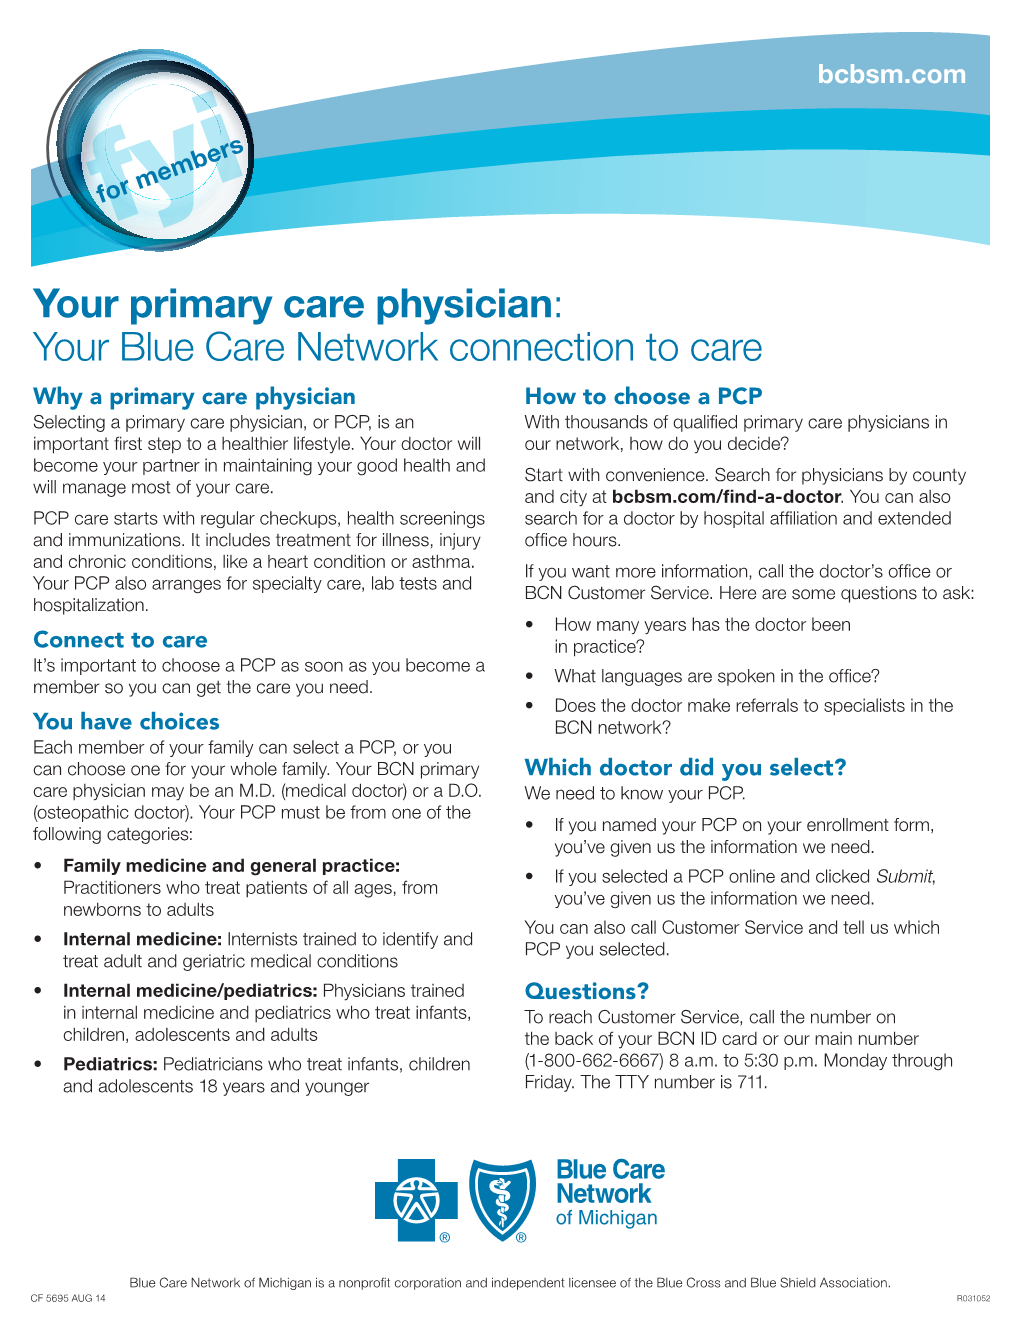 Your Primary Care Physician: Your Blue Care Network Connection to Care